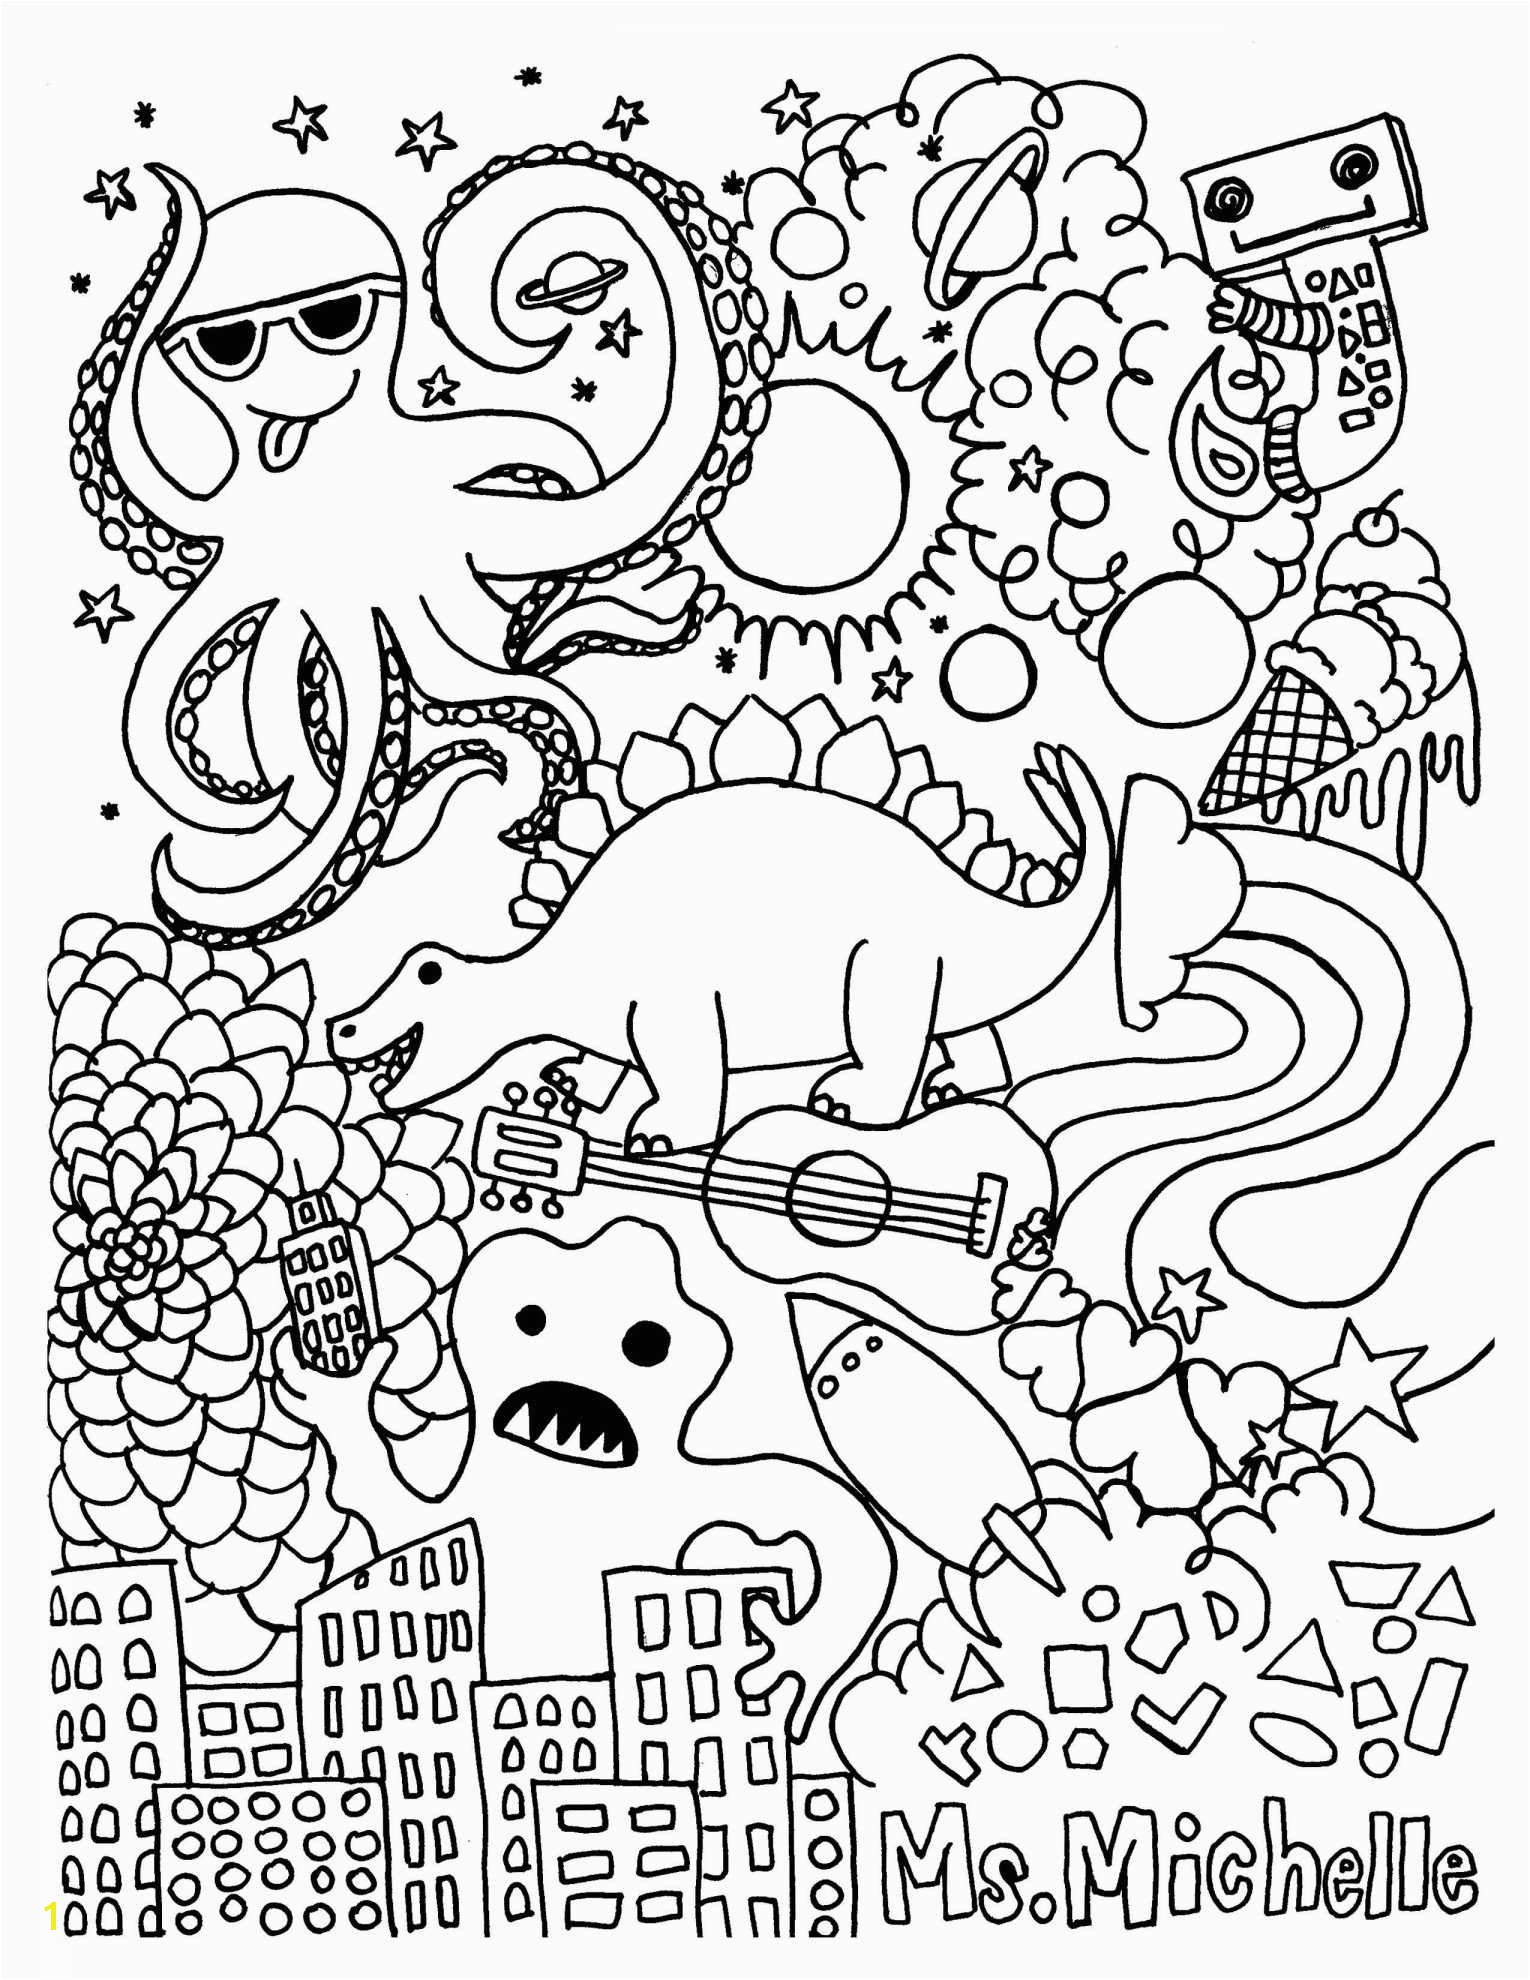 Toy Story 1 Coloring Pages Coloring Pages Free Printable Coloring Pages for Children that You